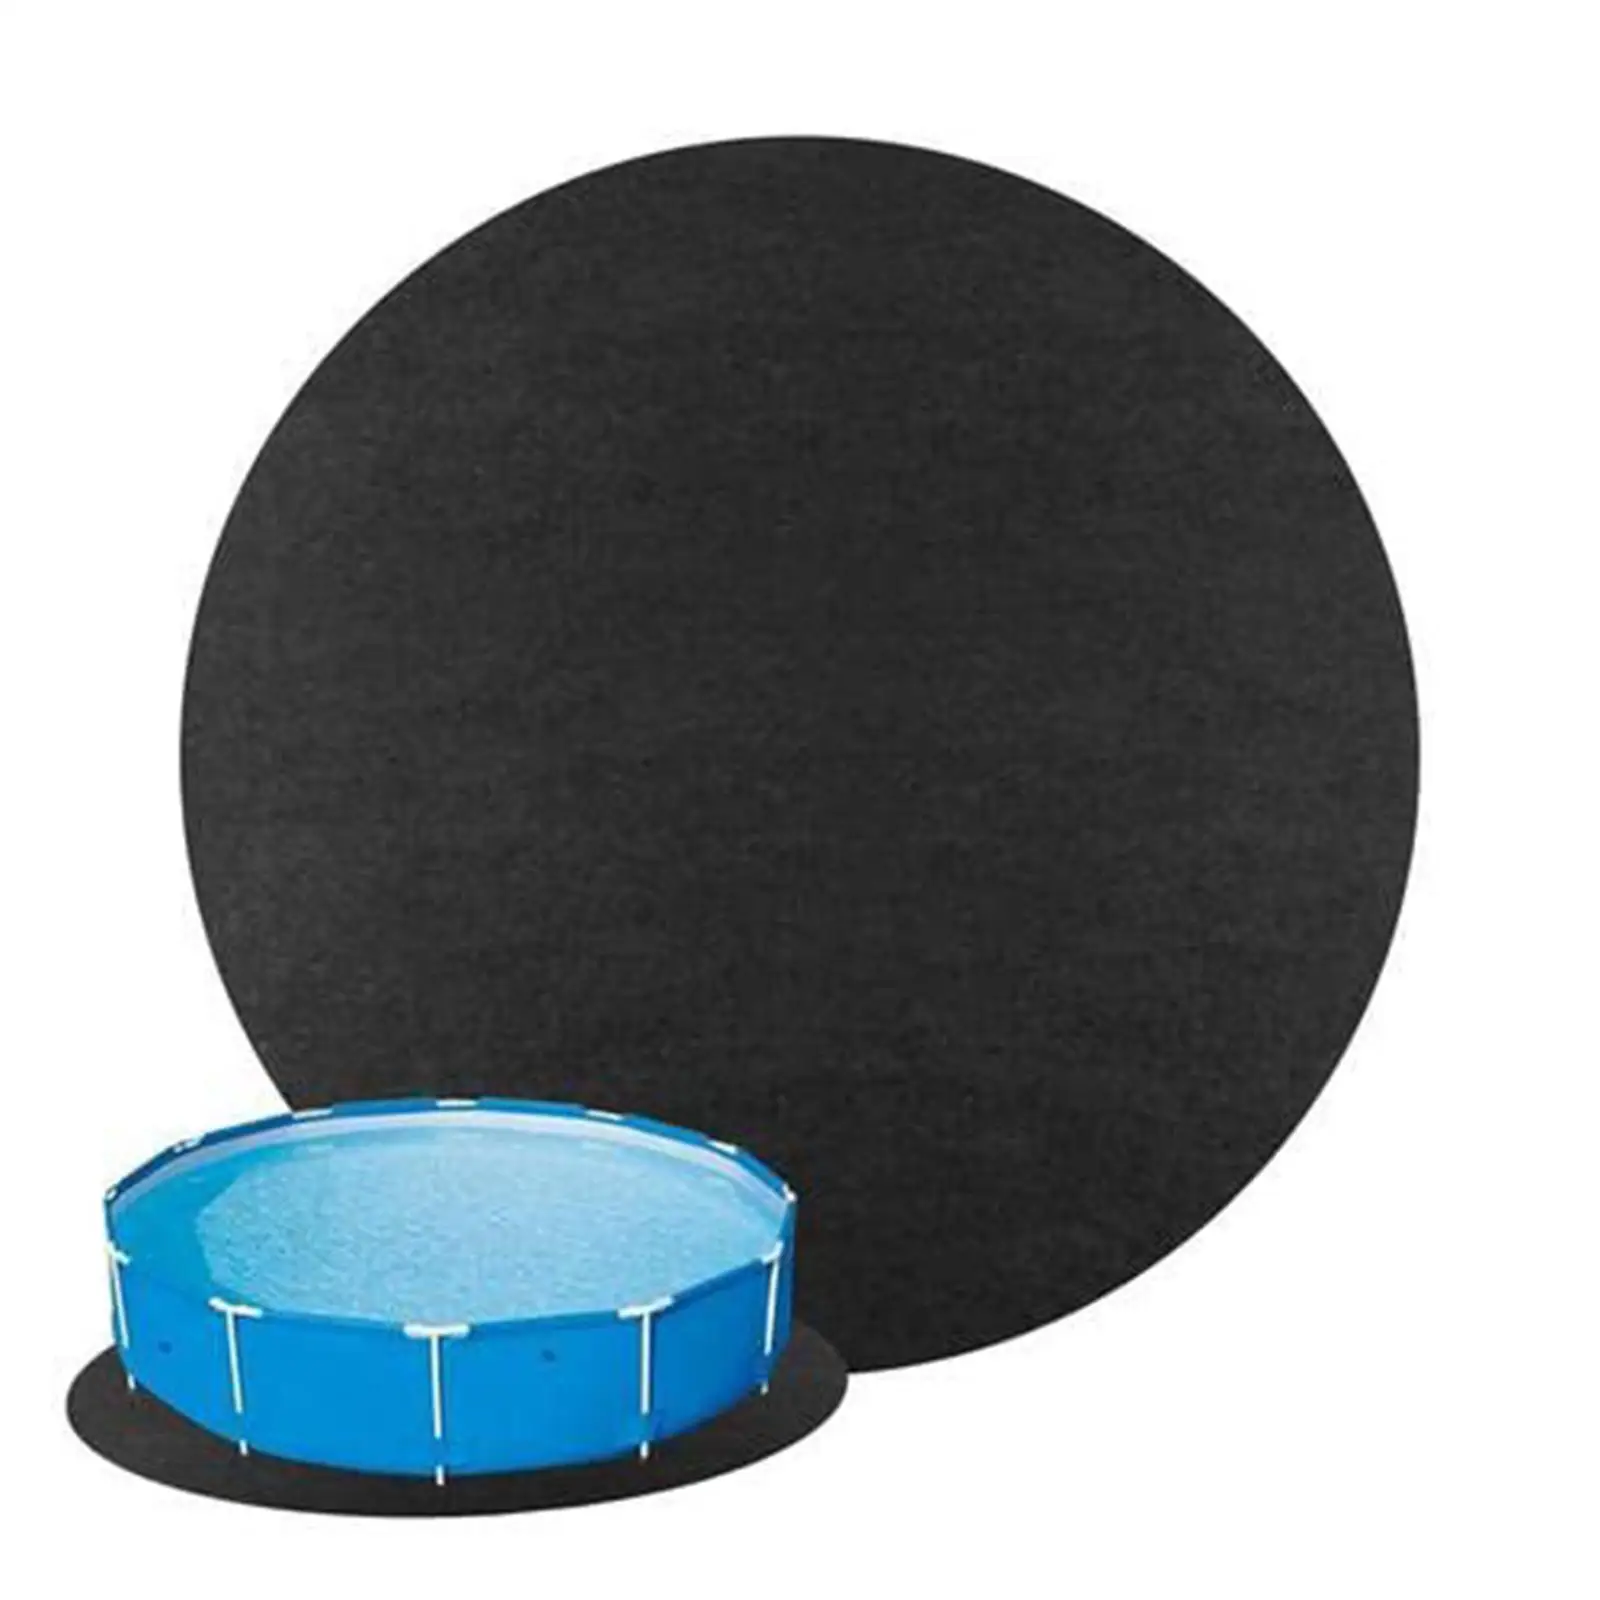 Pool Liner Pad, Pool Accessories Thick Pool Pads for above Ground Pool, for 4m Inflatable Pool Swimming pool